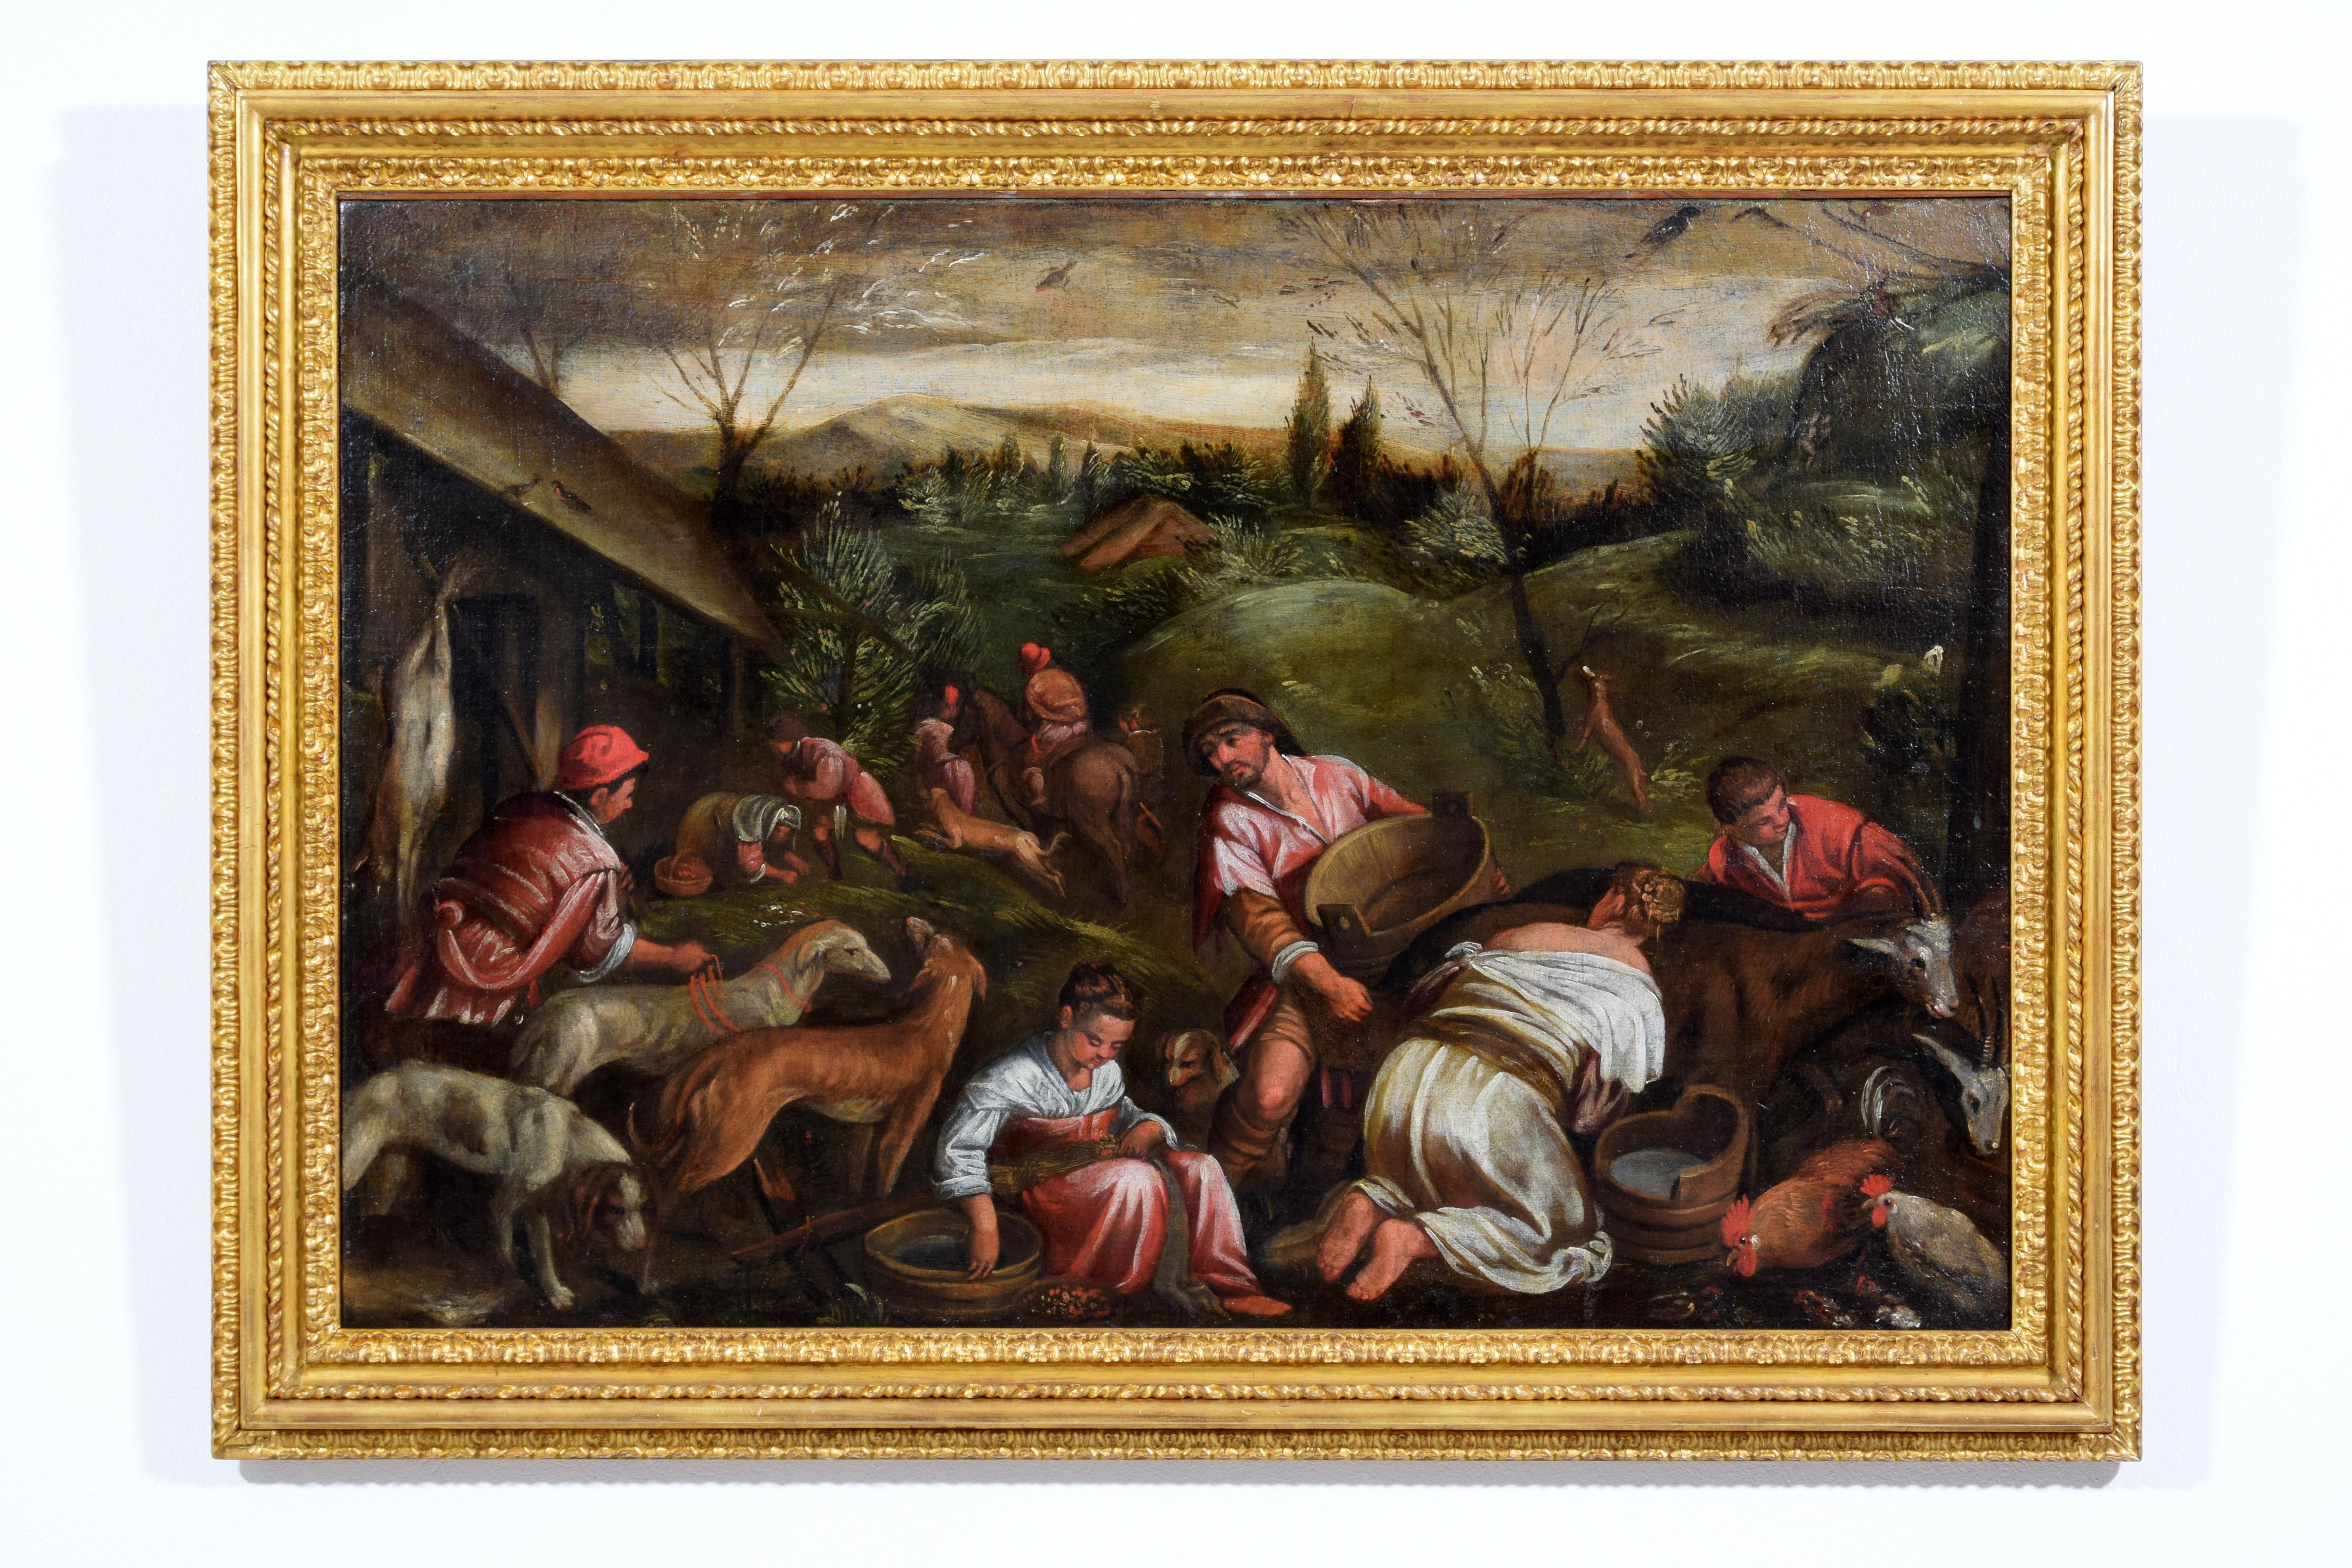 Follower of Jacopo Da Ponte, called Jacopo Bassano (Bassano del Grappa, circa 1510 - Bassano del Grappa, 13 February 1592), 17th century
Allegory of the Spring
Measures: With frame: cm W 122,5 x H 89 x D 6,5. Canvas: cm W 106,5 x H 72

The painting,